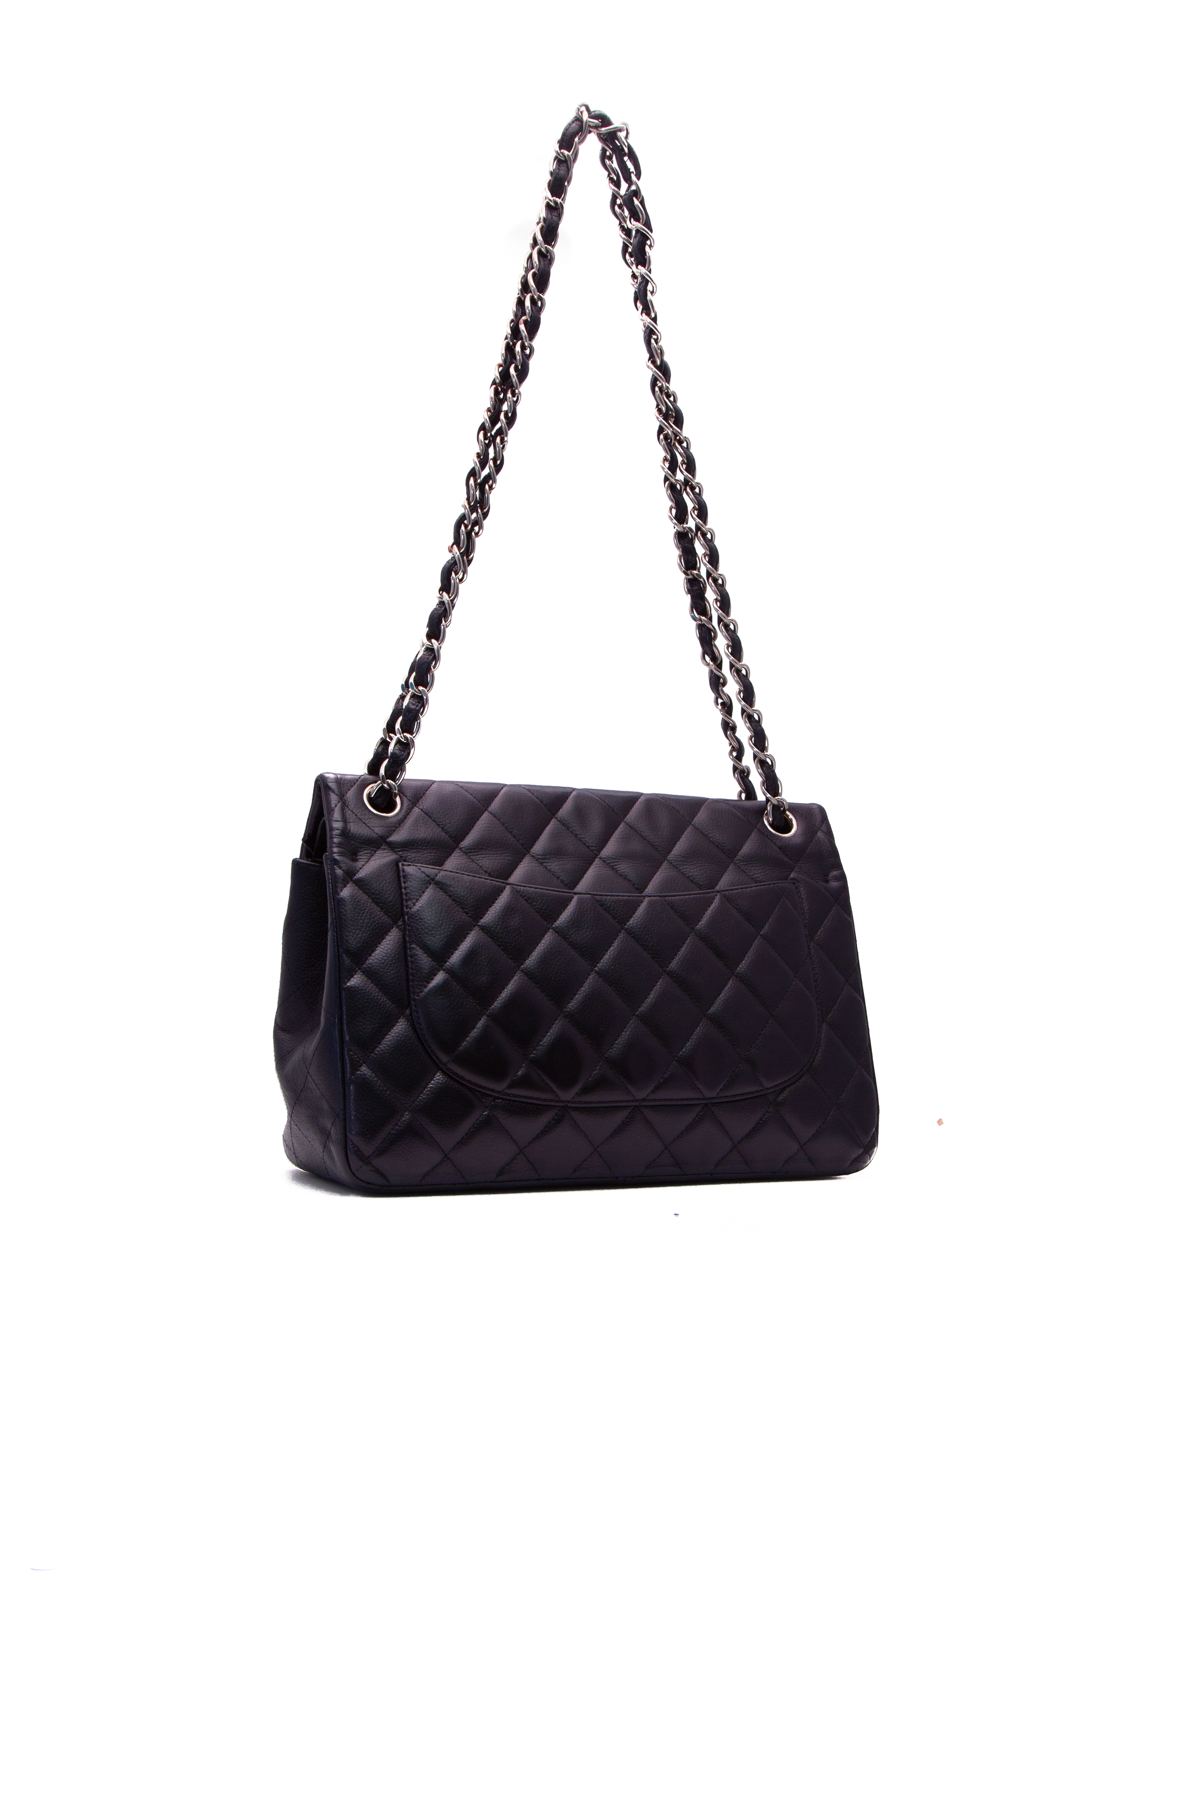 CHANEL Tweed Lambskin Quilted Arm Coin Purse Black 1265713